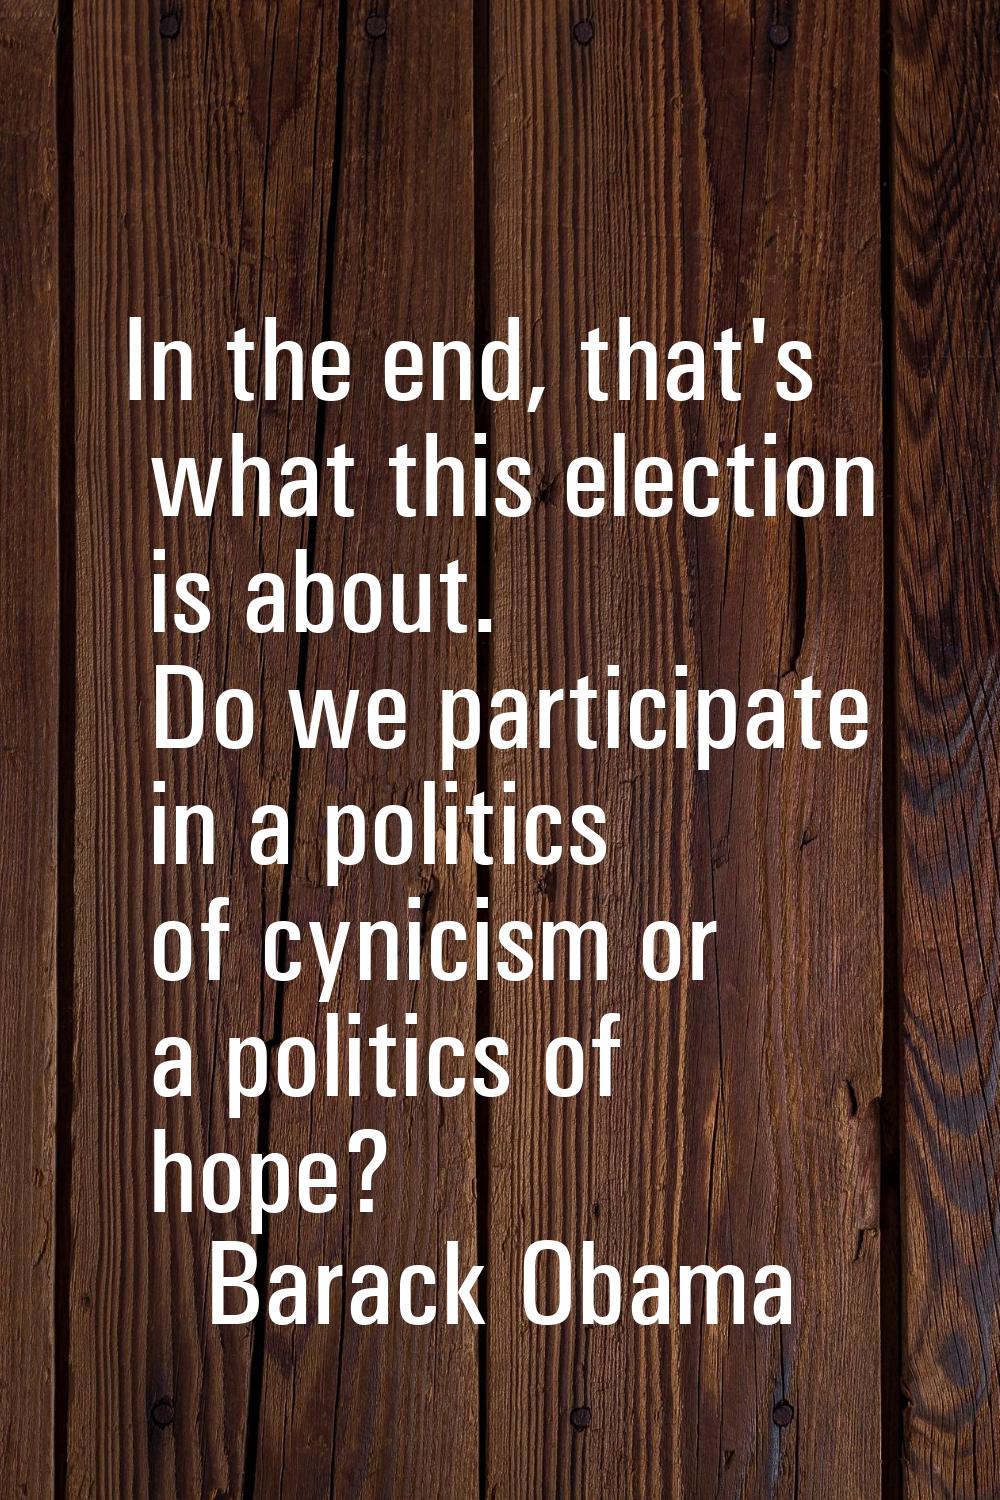 In the end, that's what this election is about. Do we participate in a politics of cynicism or a po